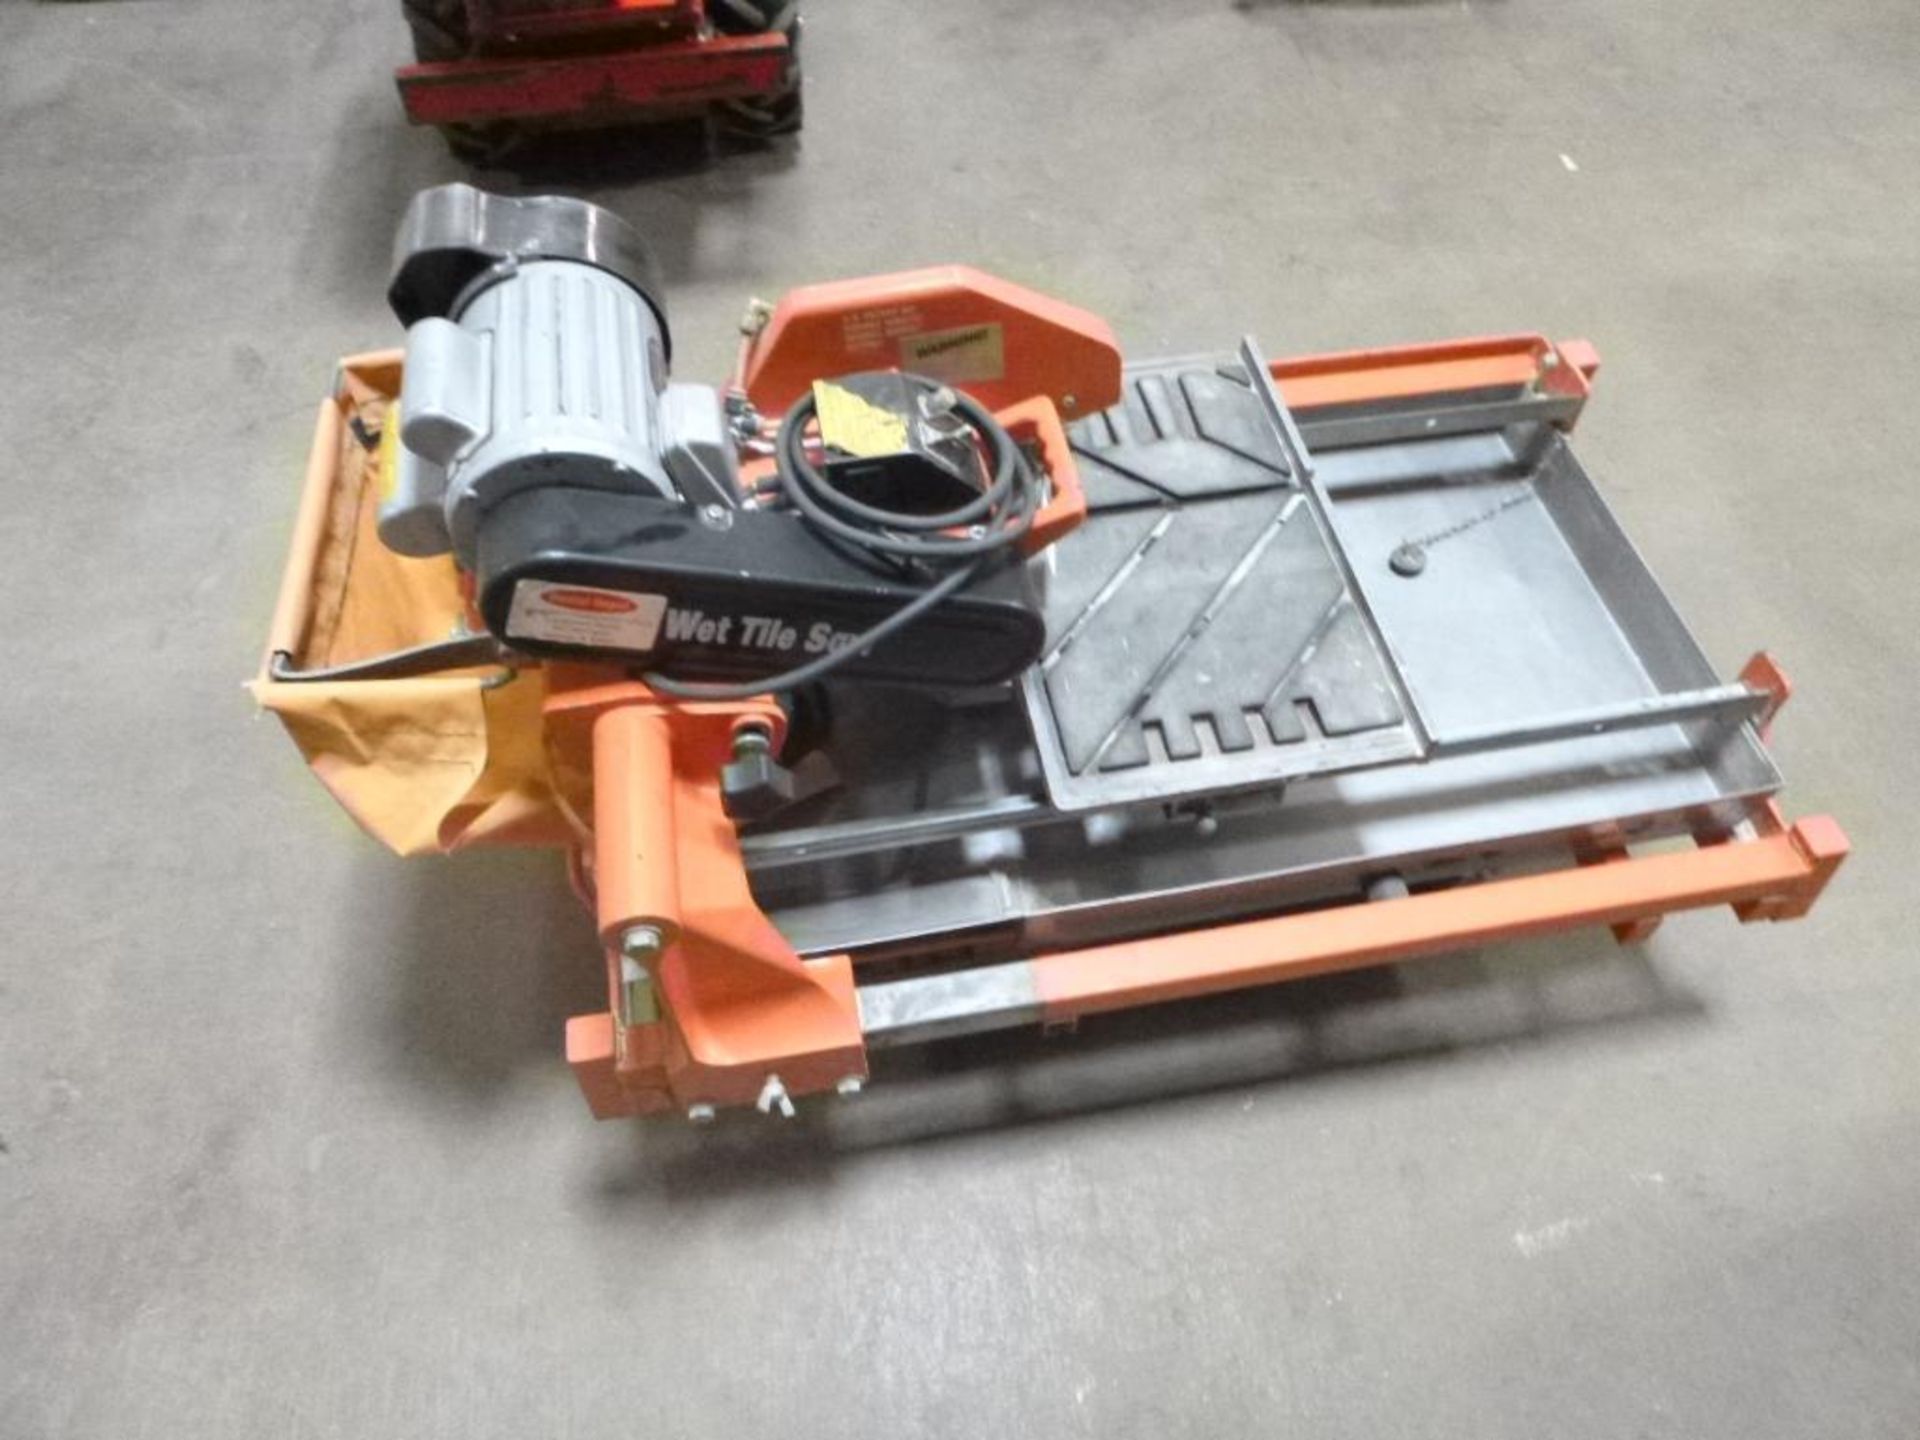 LOT: Core Cut CC1000T 10 in. Tile Saw, S/N CC110163, with Stand, Cuts 24 in. Tile - Image 6 of 8